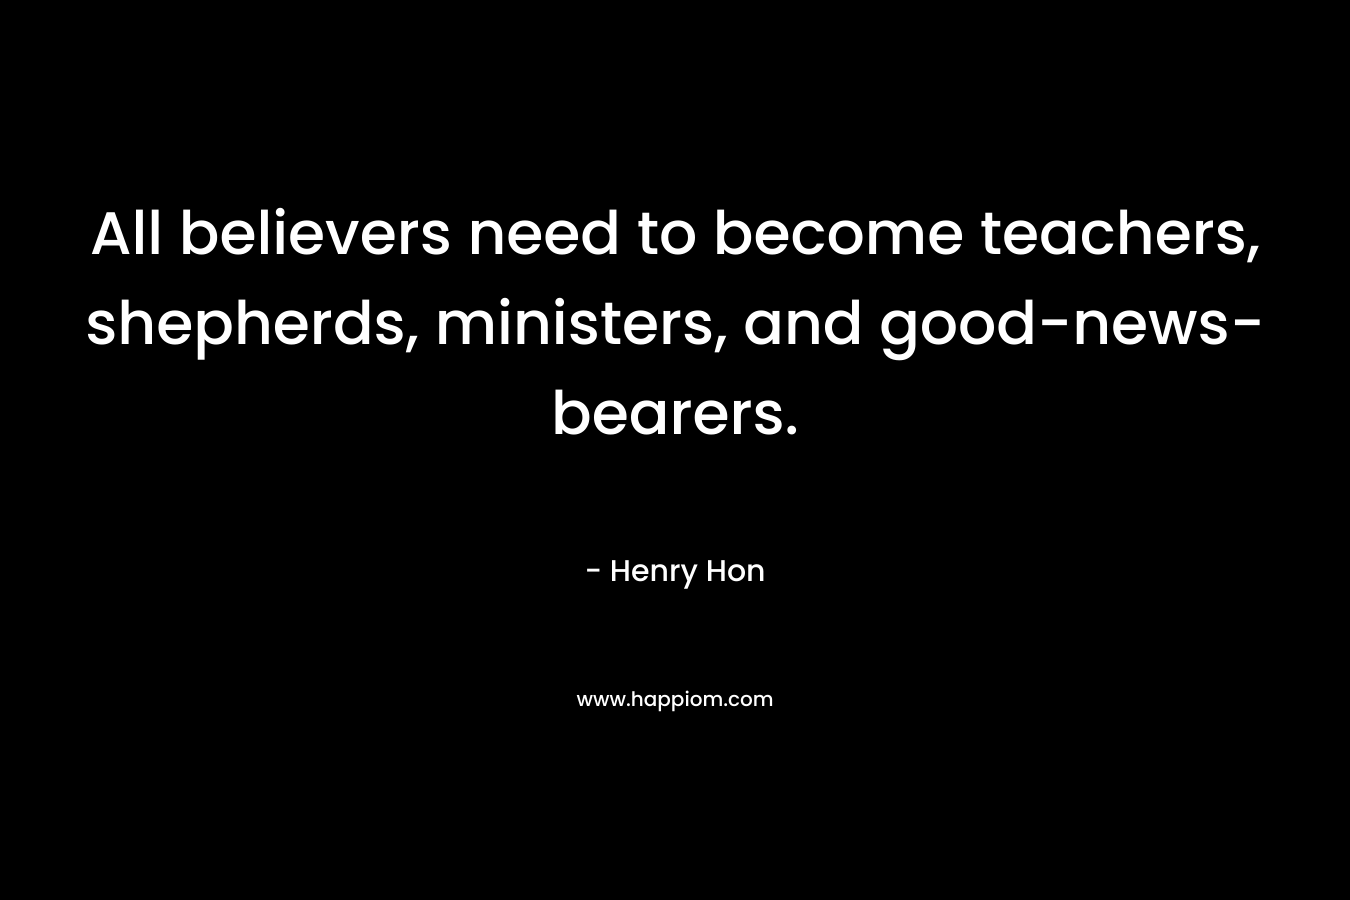 All believers need to become teachers, shepherds, ministers, and good-news-bearers. – Henry Hon